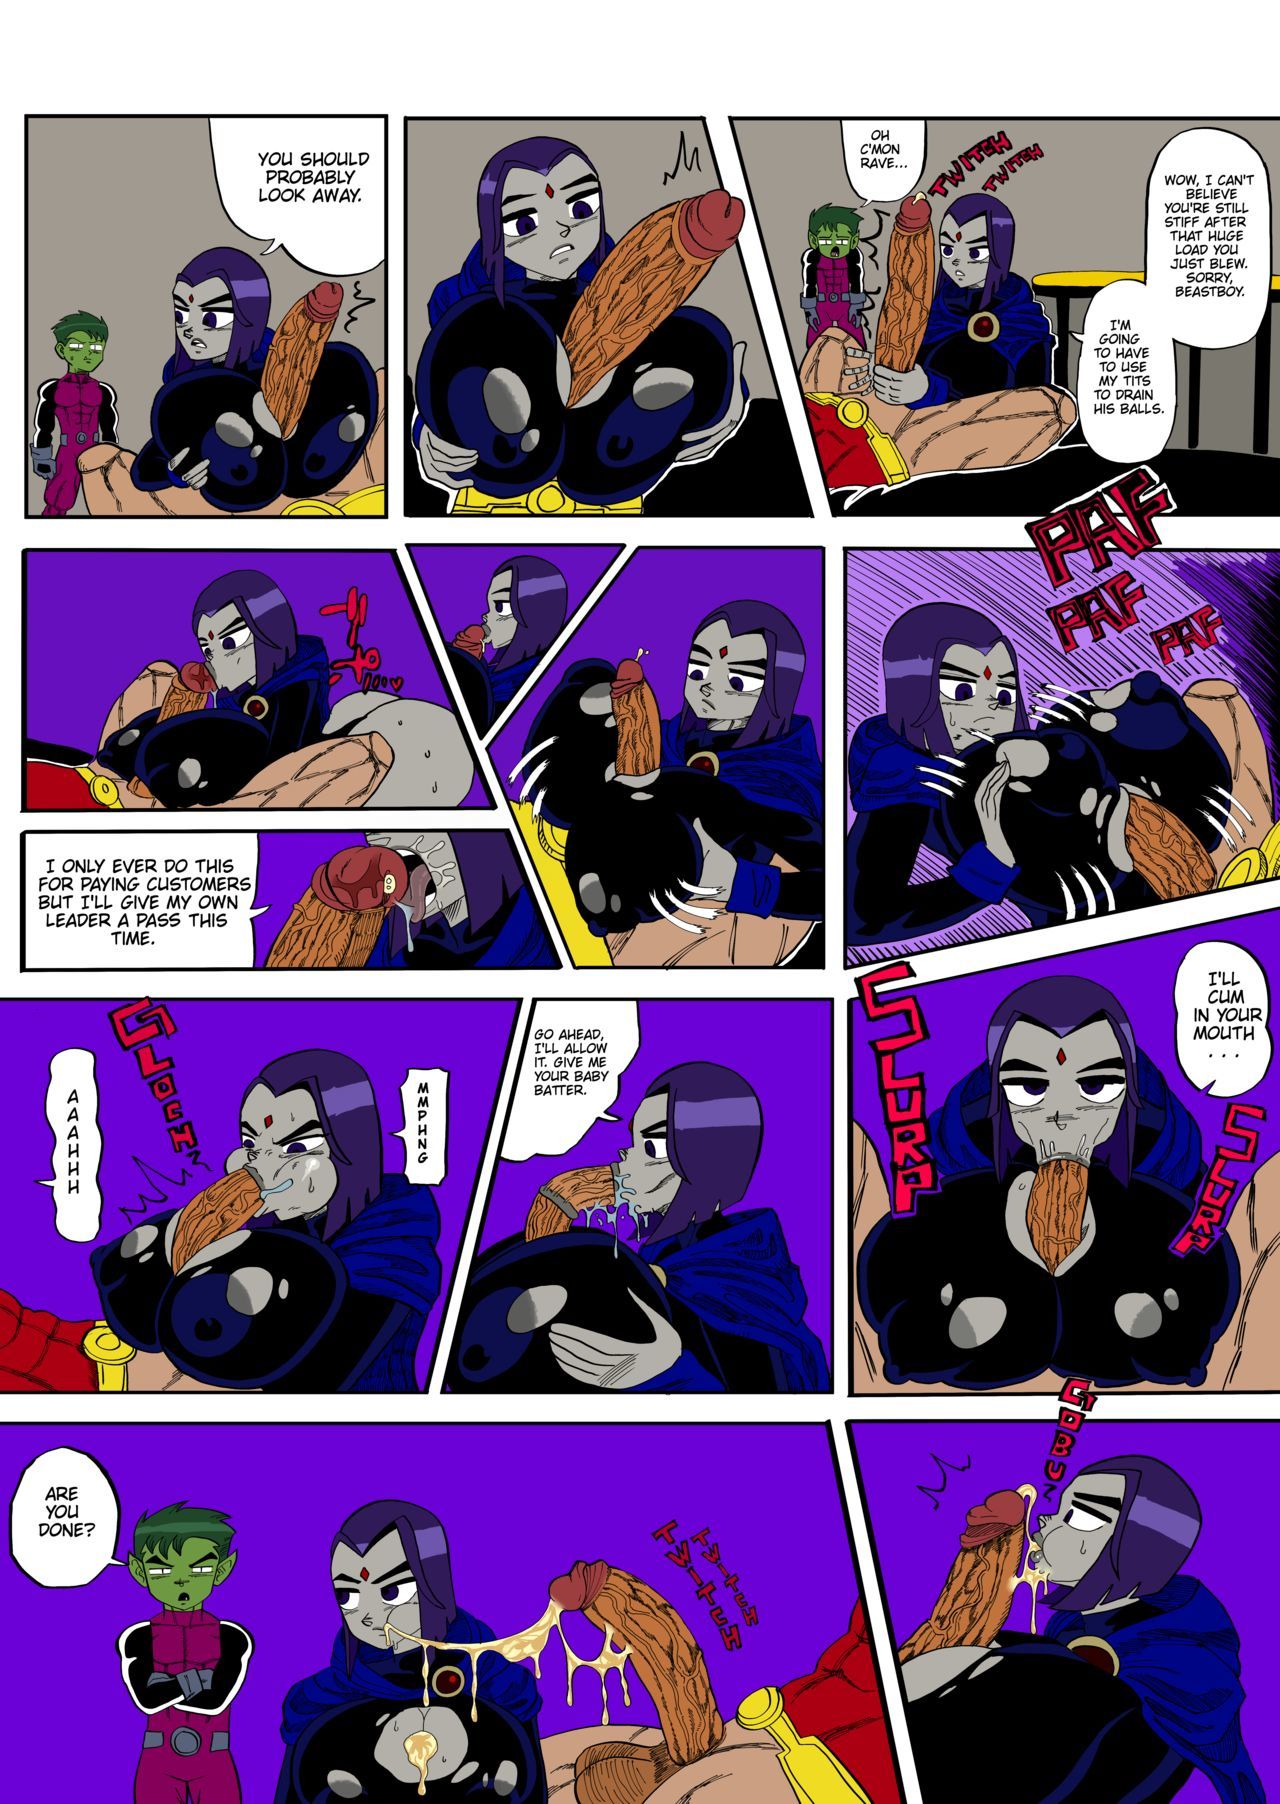 Teen Titans Relief by DoompyPomp page 5